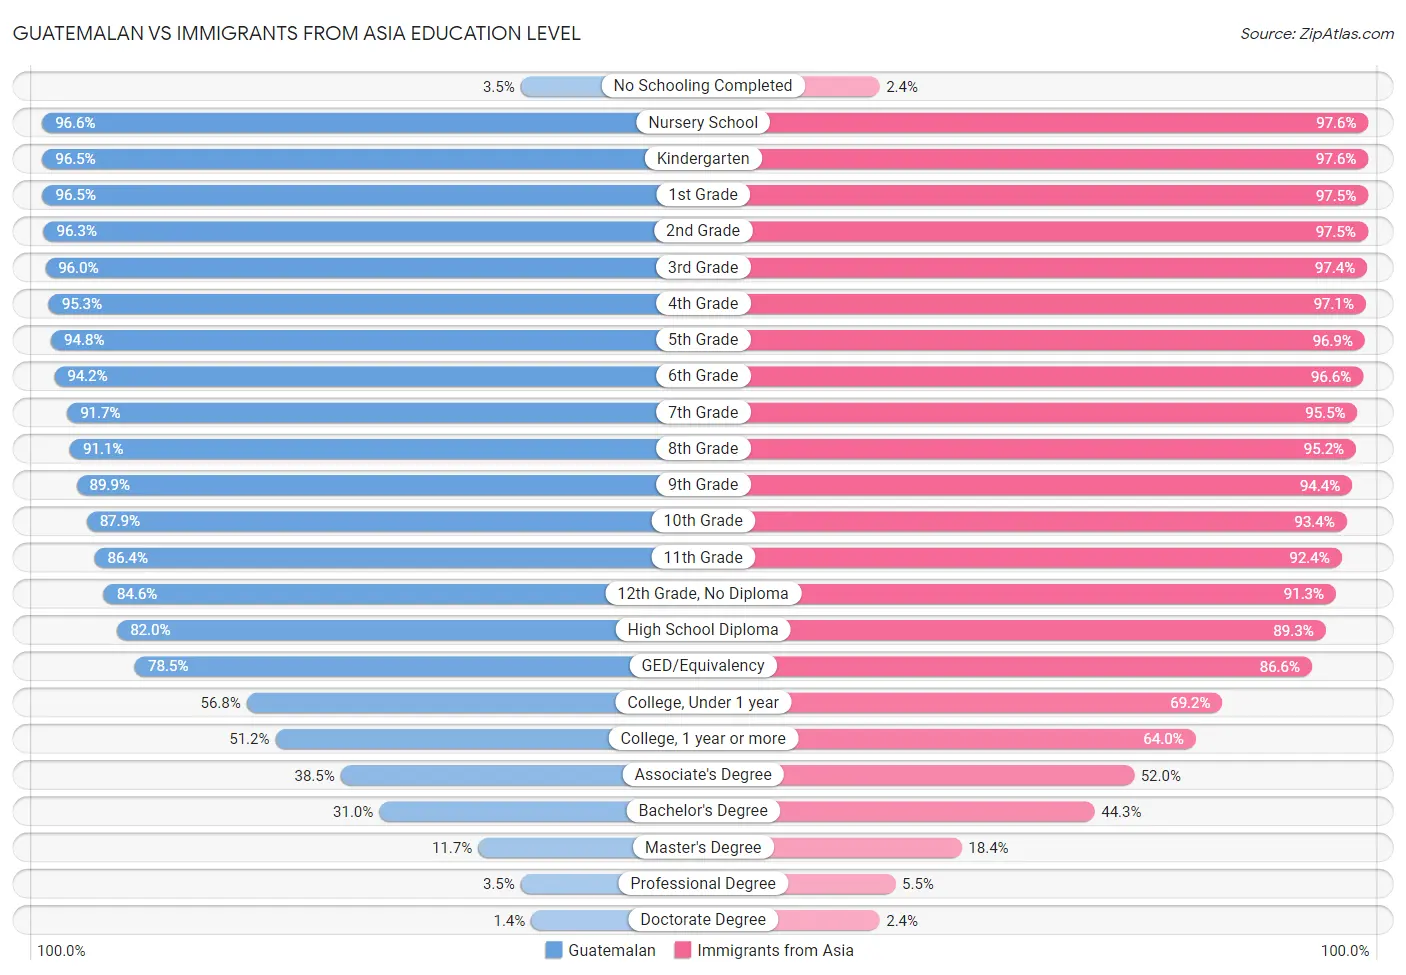 Guatemalan vs Immigrants from Asia Education Level